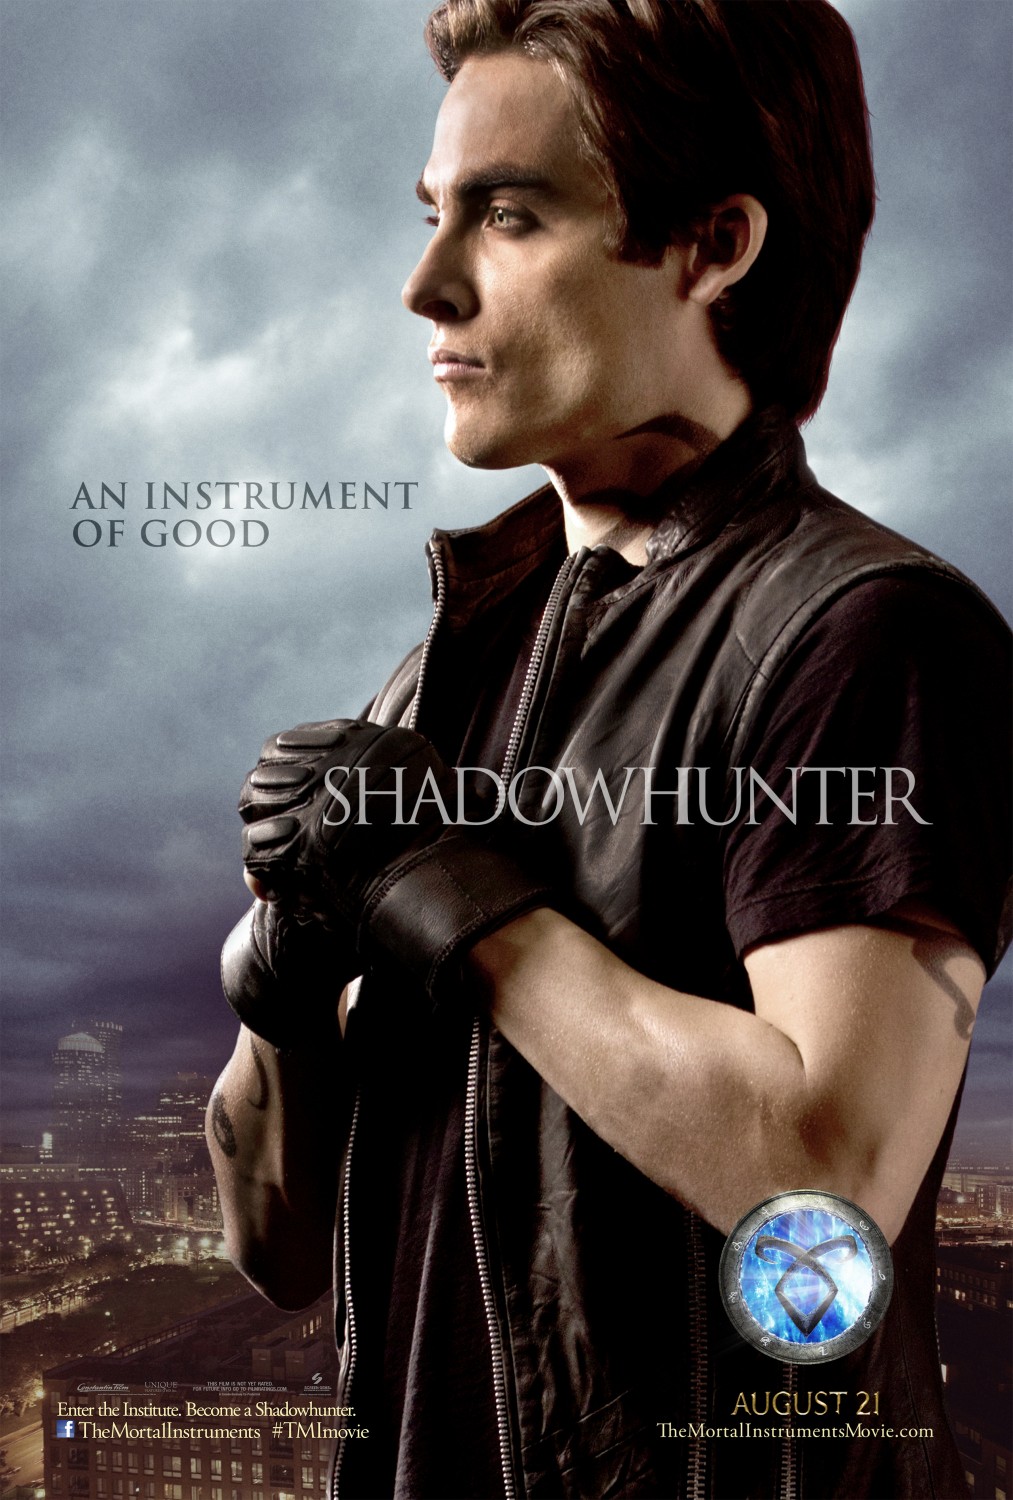 Extra Large Movie Poster Image for The Mortal Instruments: City of Bones (#9 of 15)